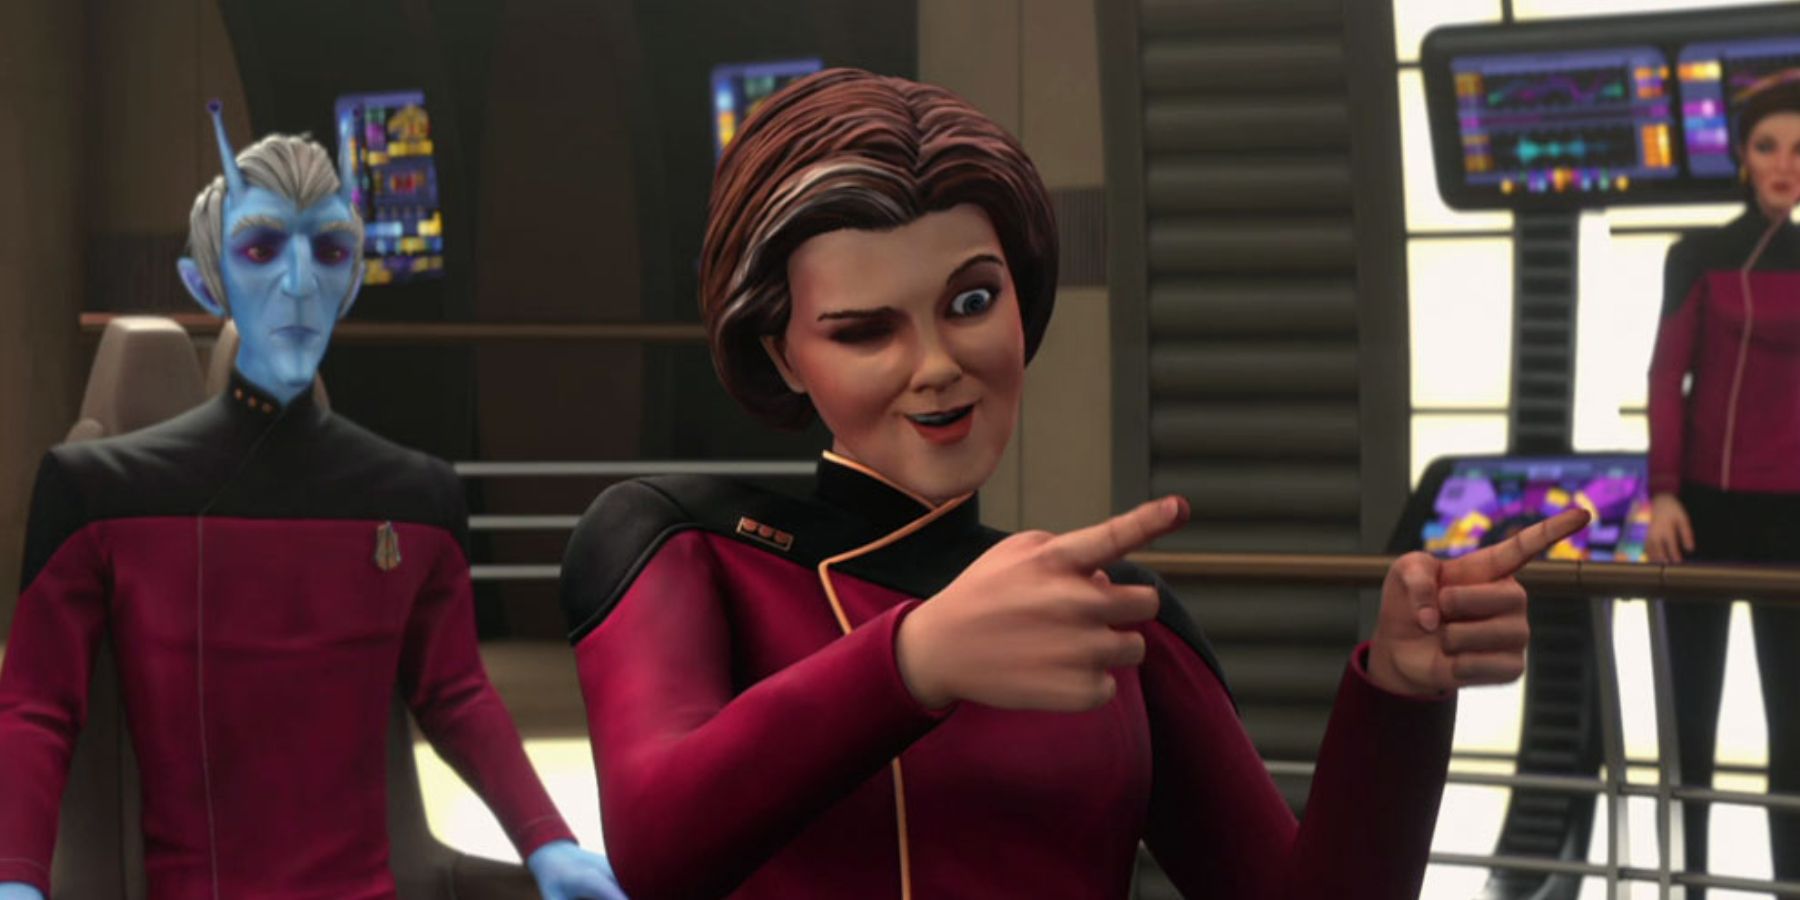 Dal as Vice Admiral Janeway gives the finger guns in Prodigy